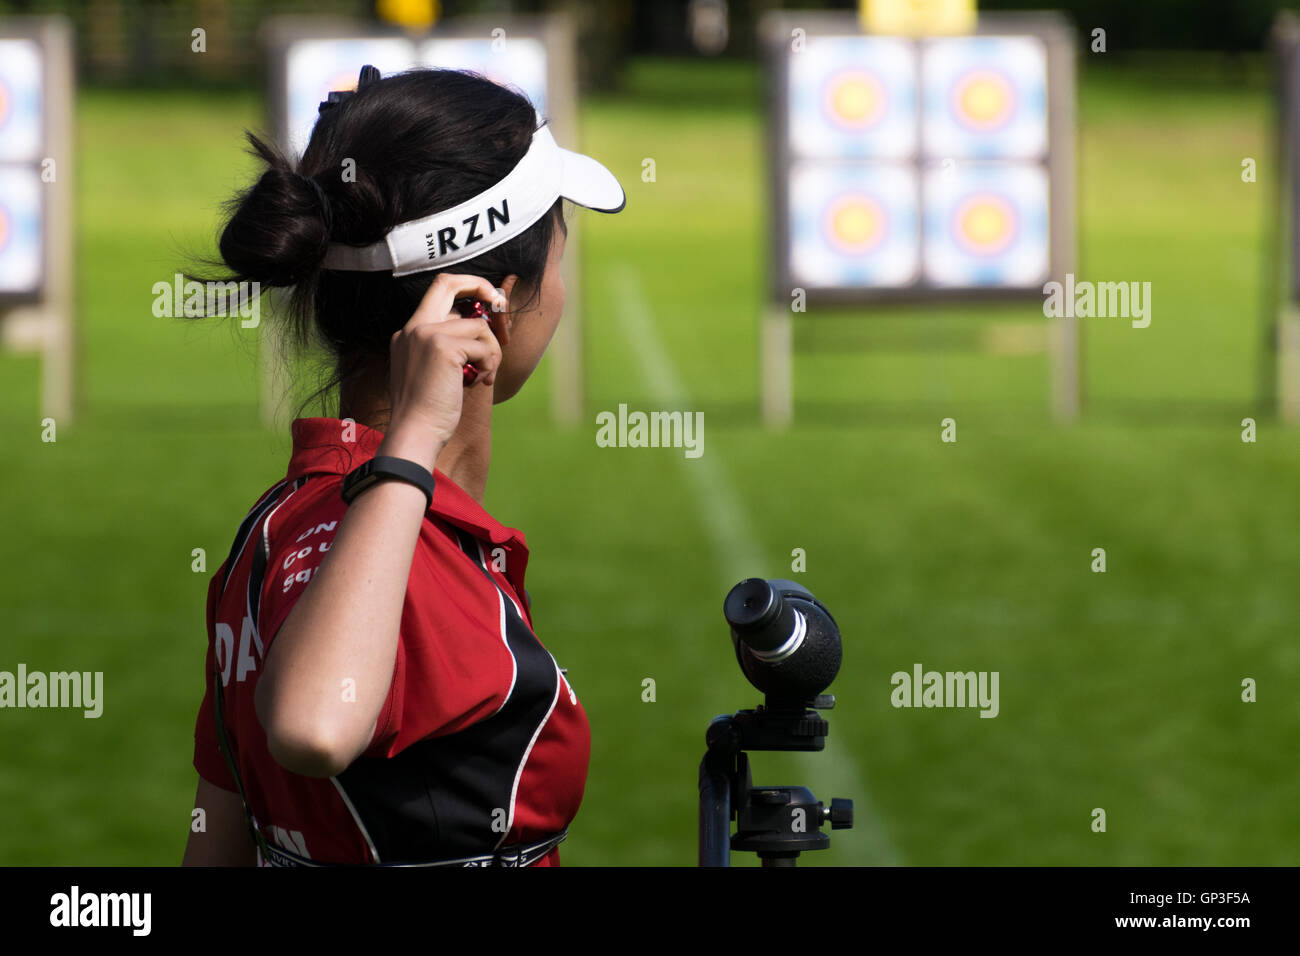 Young female compound archer and target in competition Stock Photo